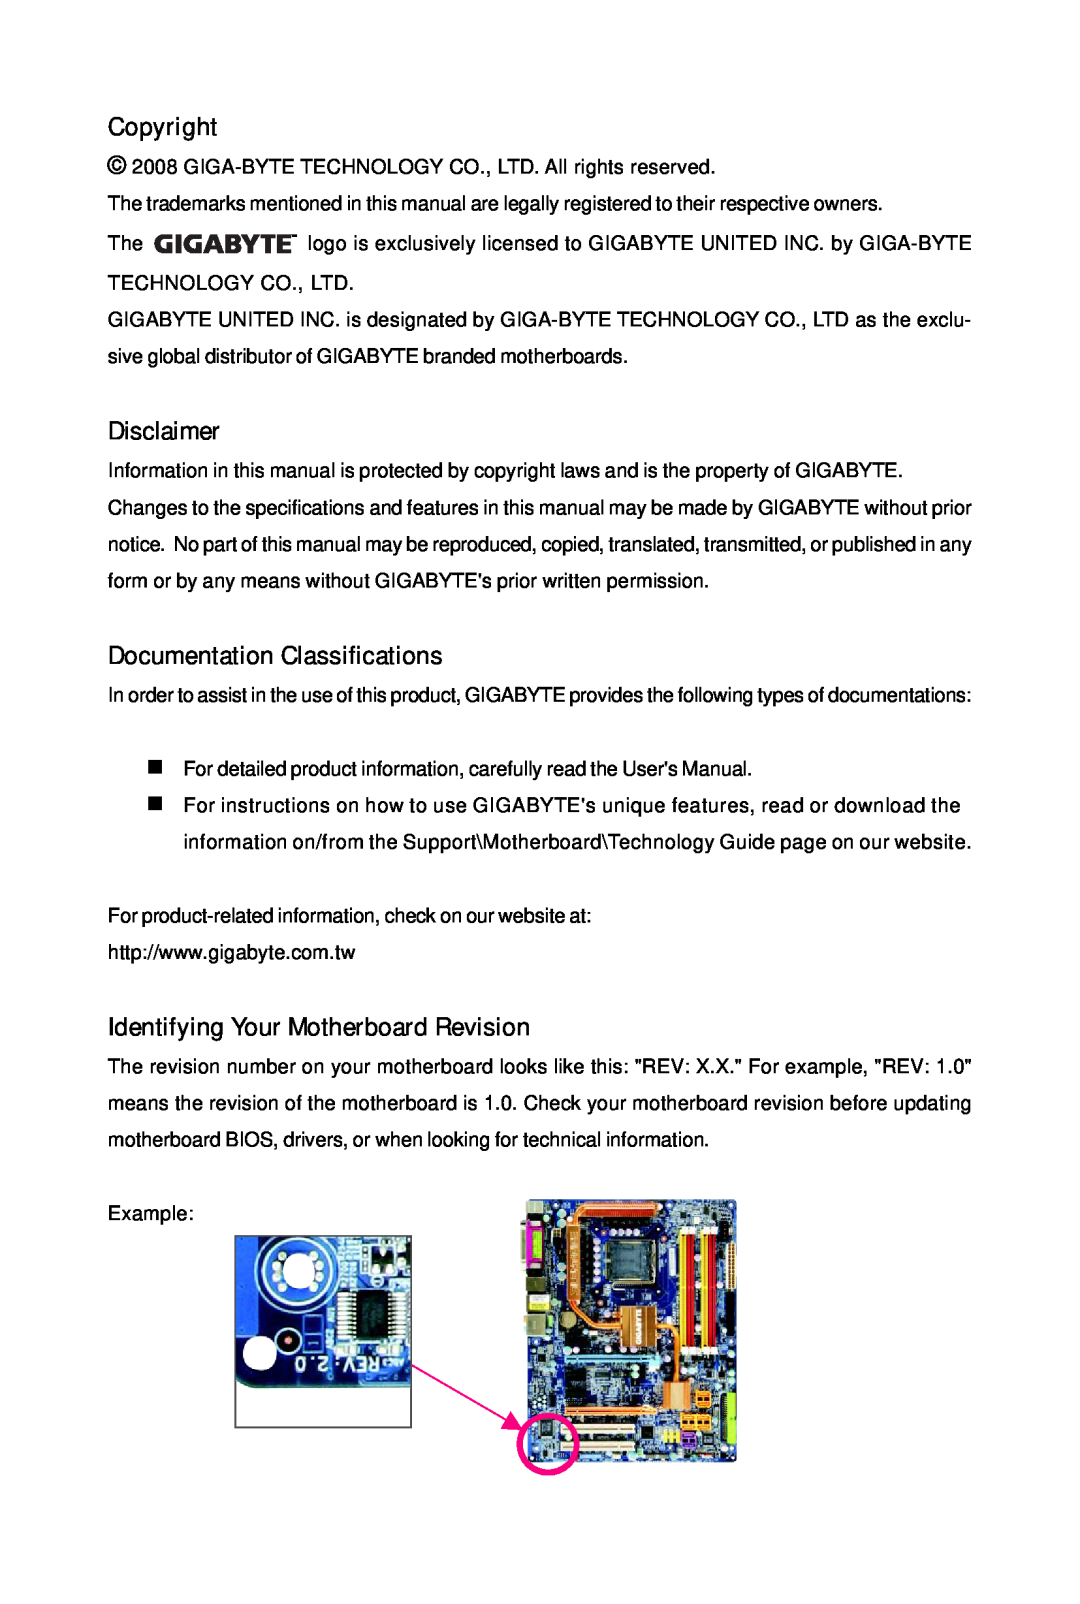 Intel GA-GC230D user manual Copyright, Disclaimer, Documentation Classifications, Identifying Your Motherboard Revision 